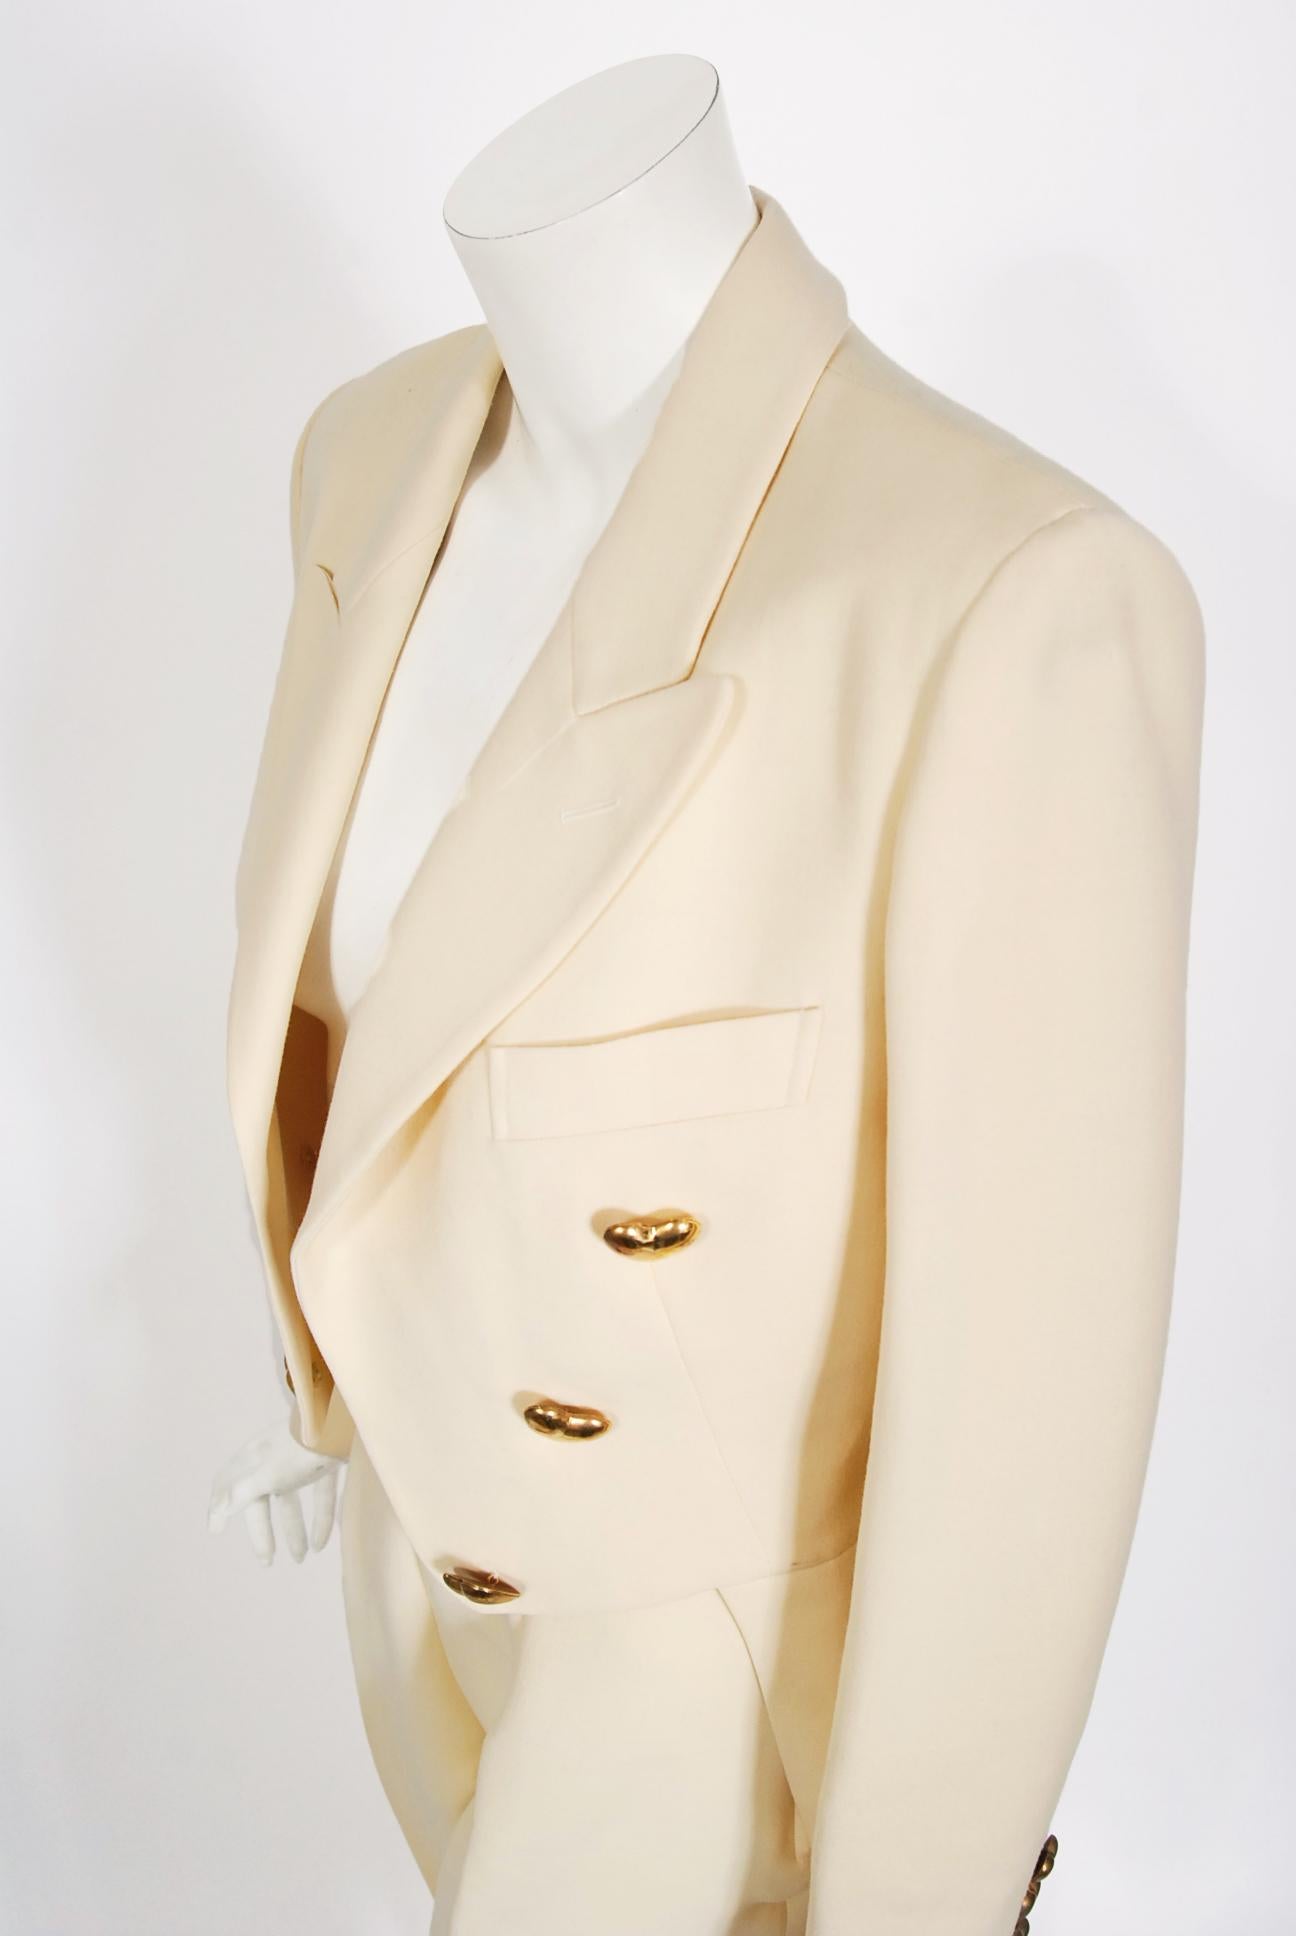 Women's Vintage 1993 Moschino Couture Cream Wool Heart Buttons Tuxedo Jacket & Pants Set